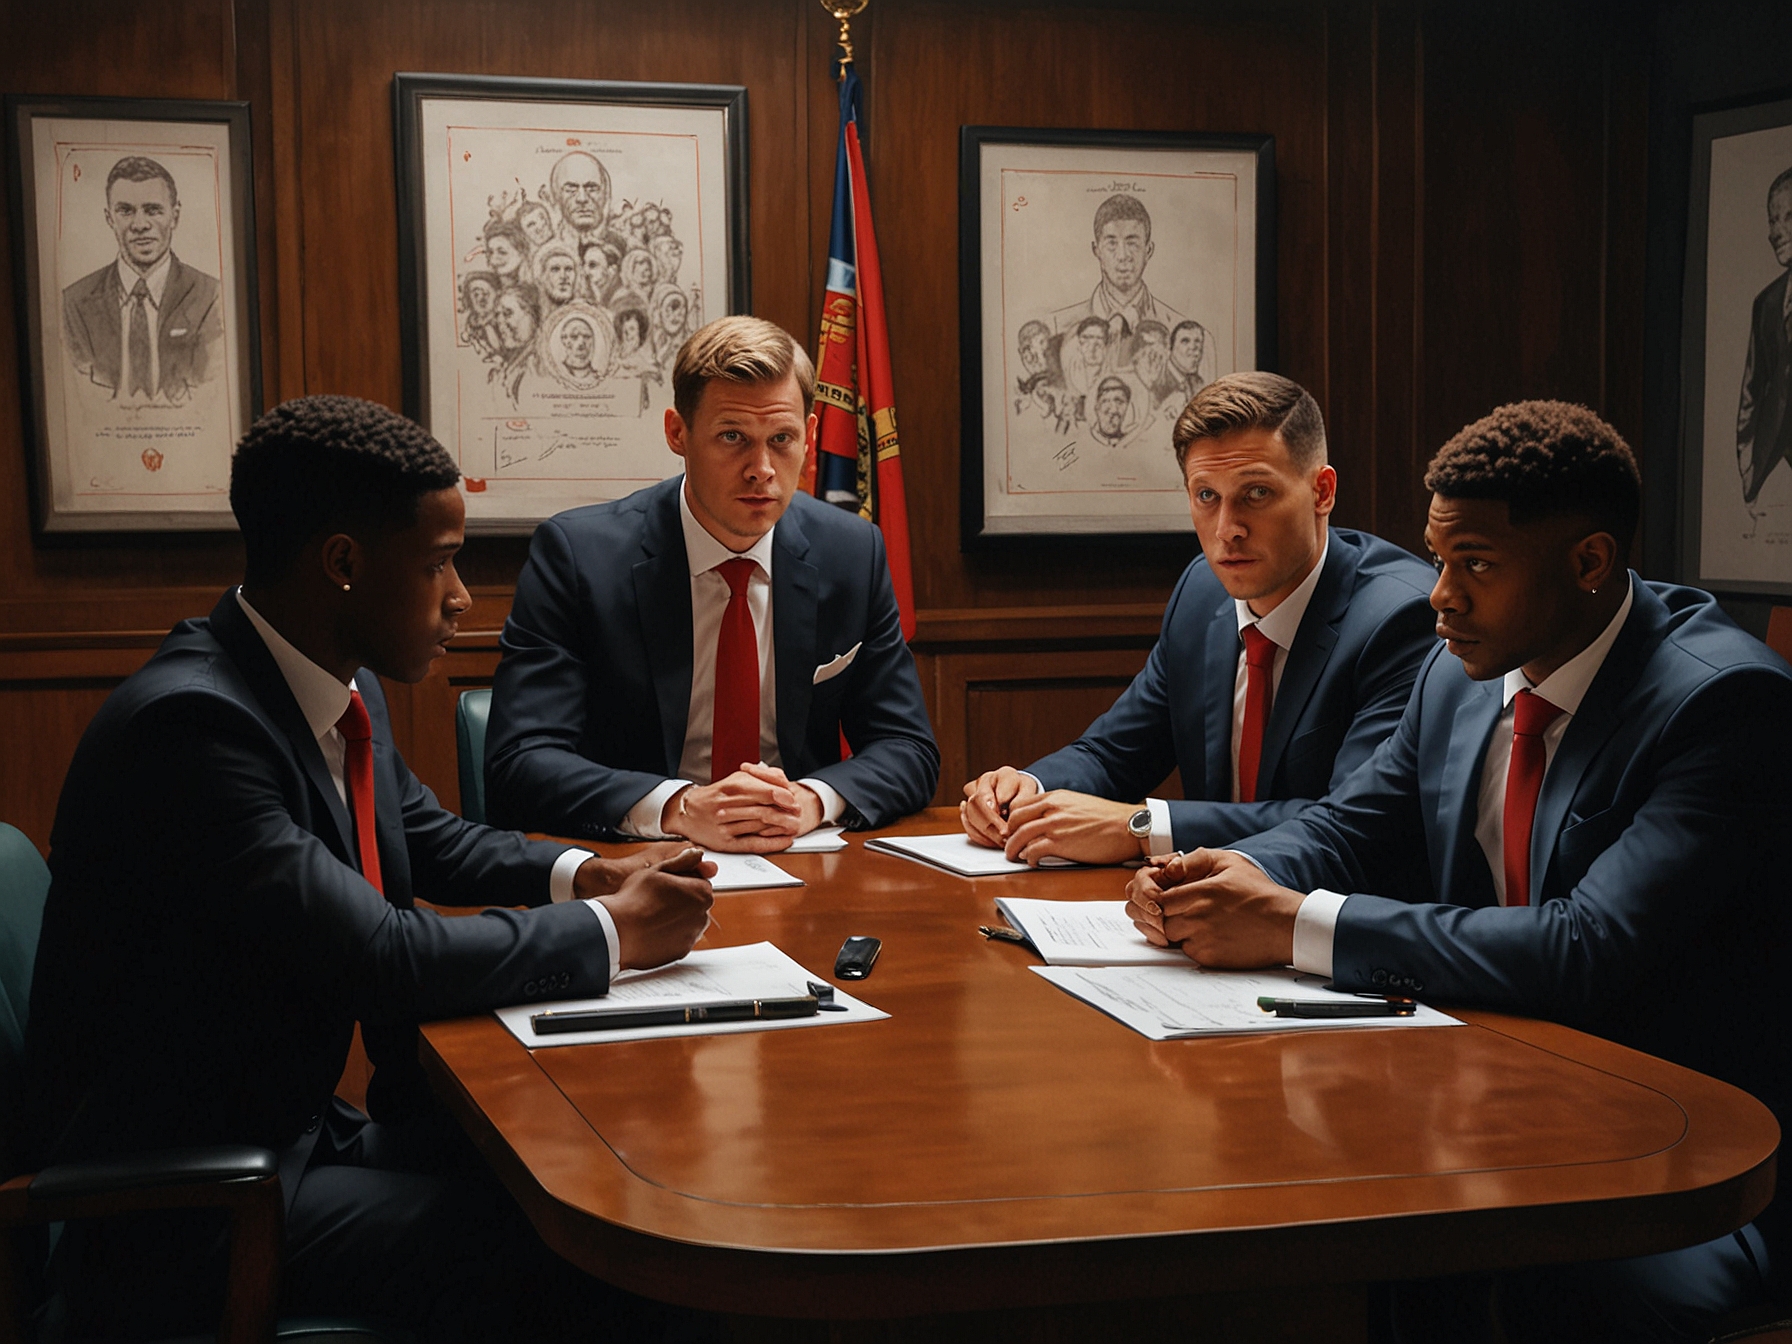 A detailed negotiation table with representatives from Manchester United and OGC Nice discussing the potential transfer of Jean-Clair Todibo, highlighting the complex co-ownership rules.